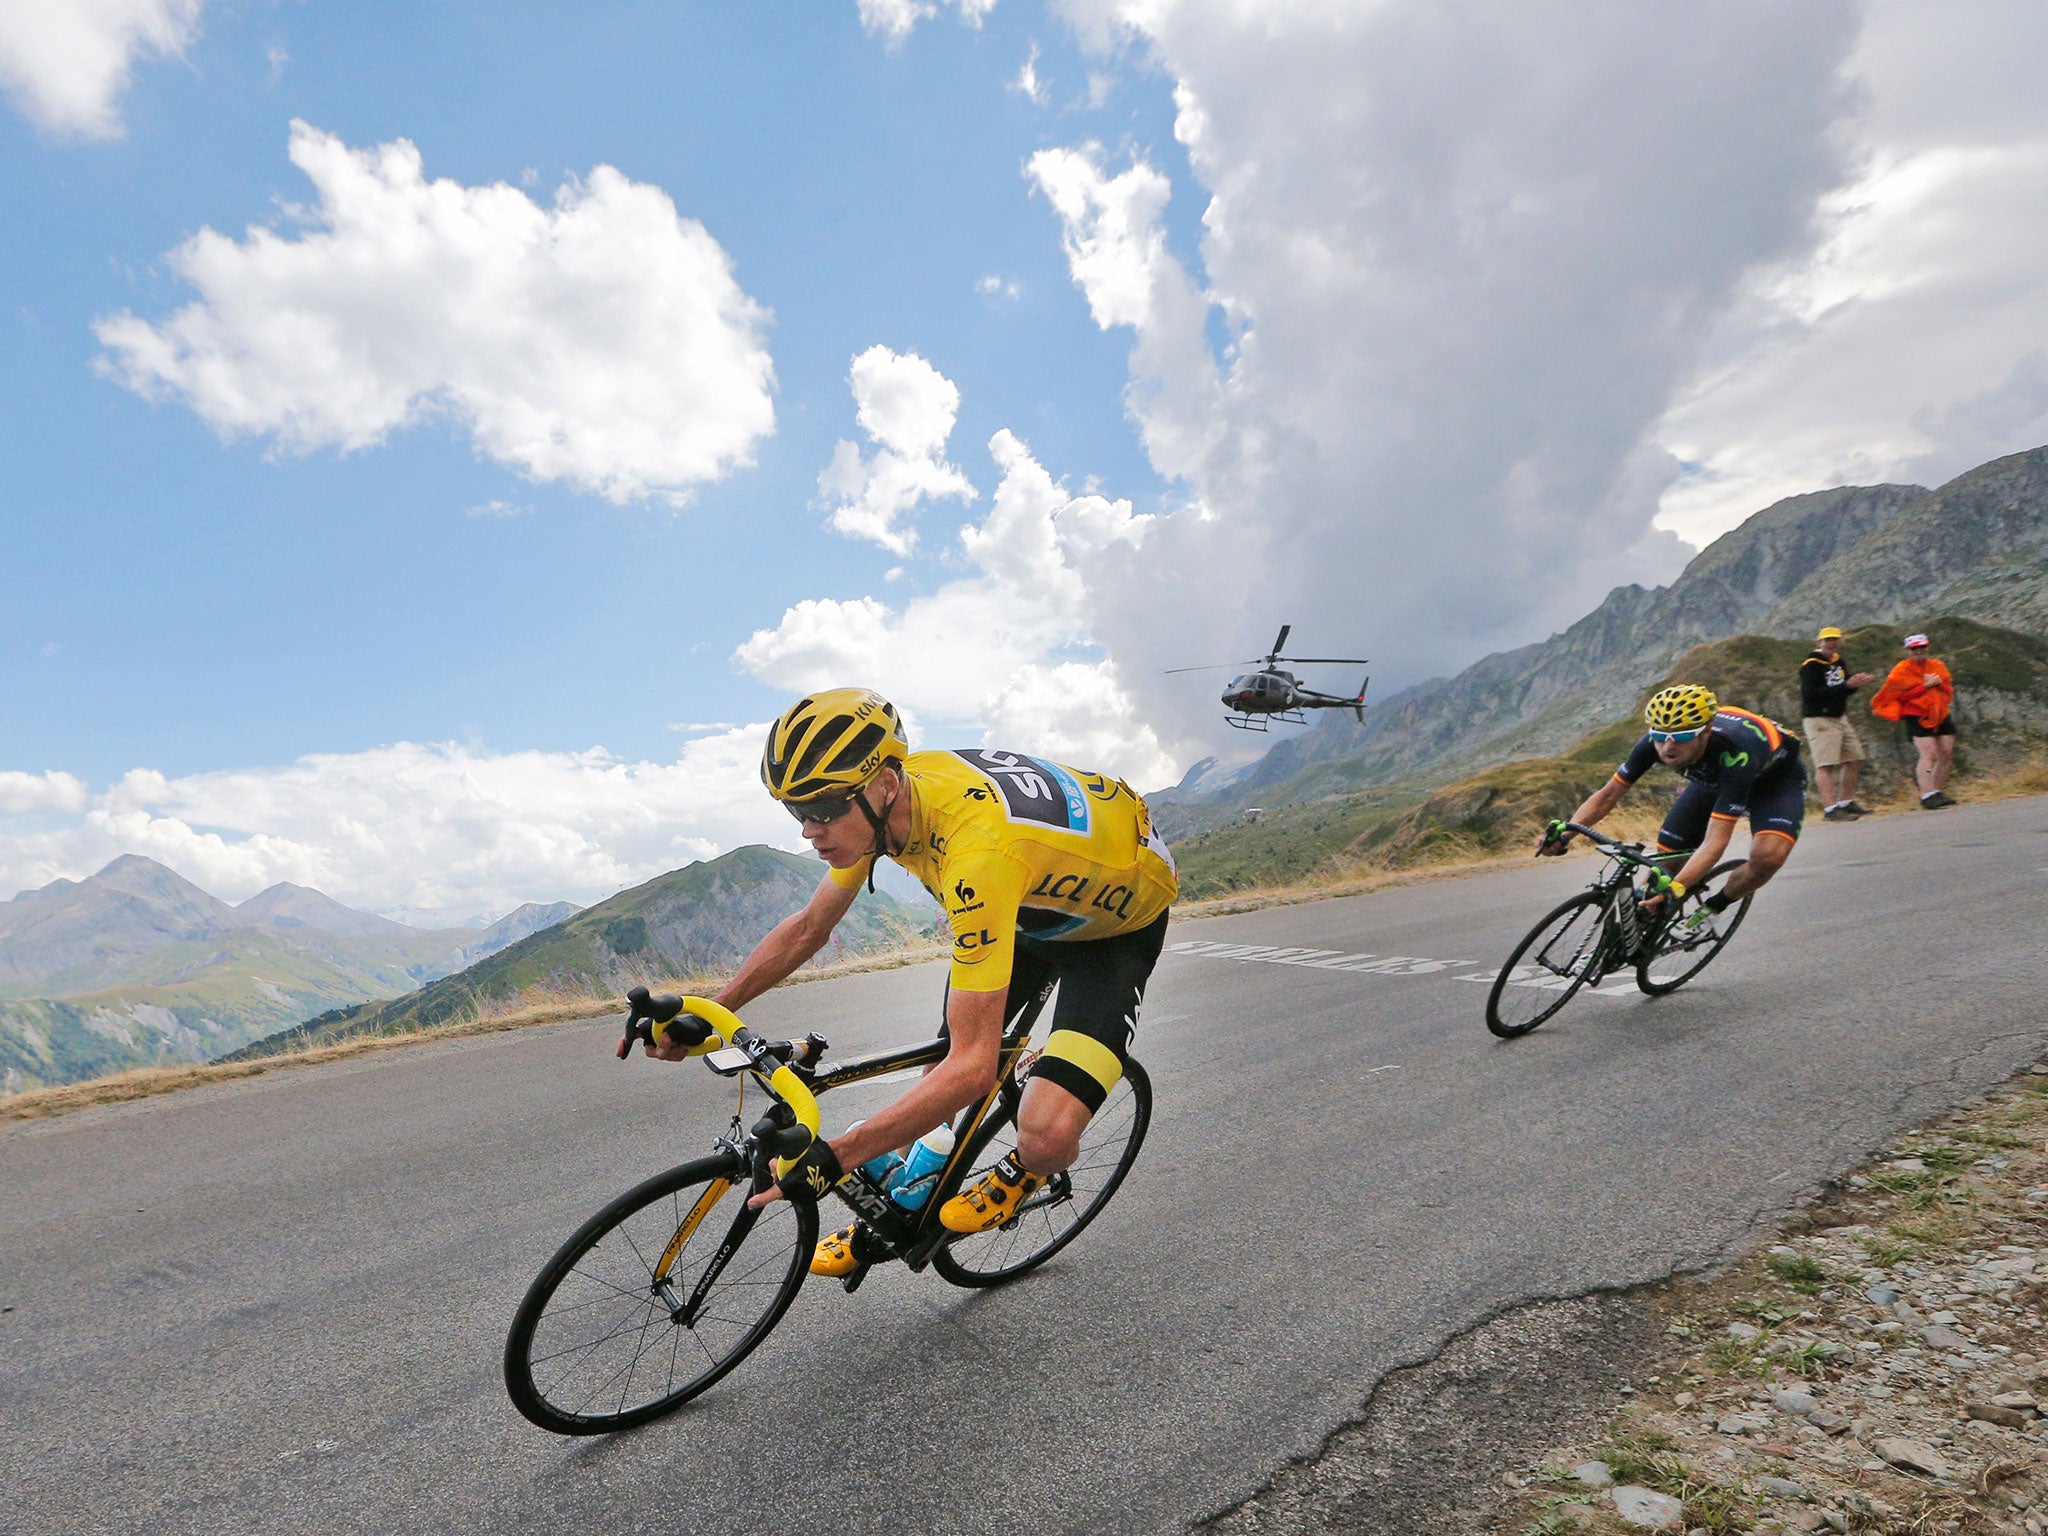 Team Sky’s Chris Froome suffered a difficult day in the Tour de France yesterday but still takes a healthy lead into today’s critical ascent of Alpe d’Huez